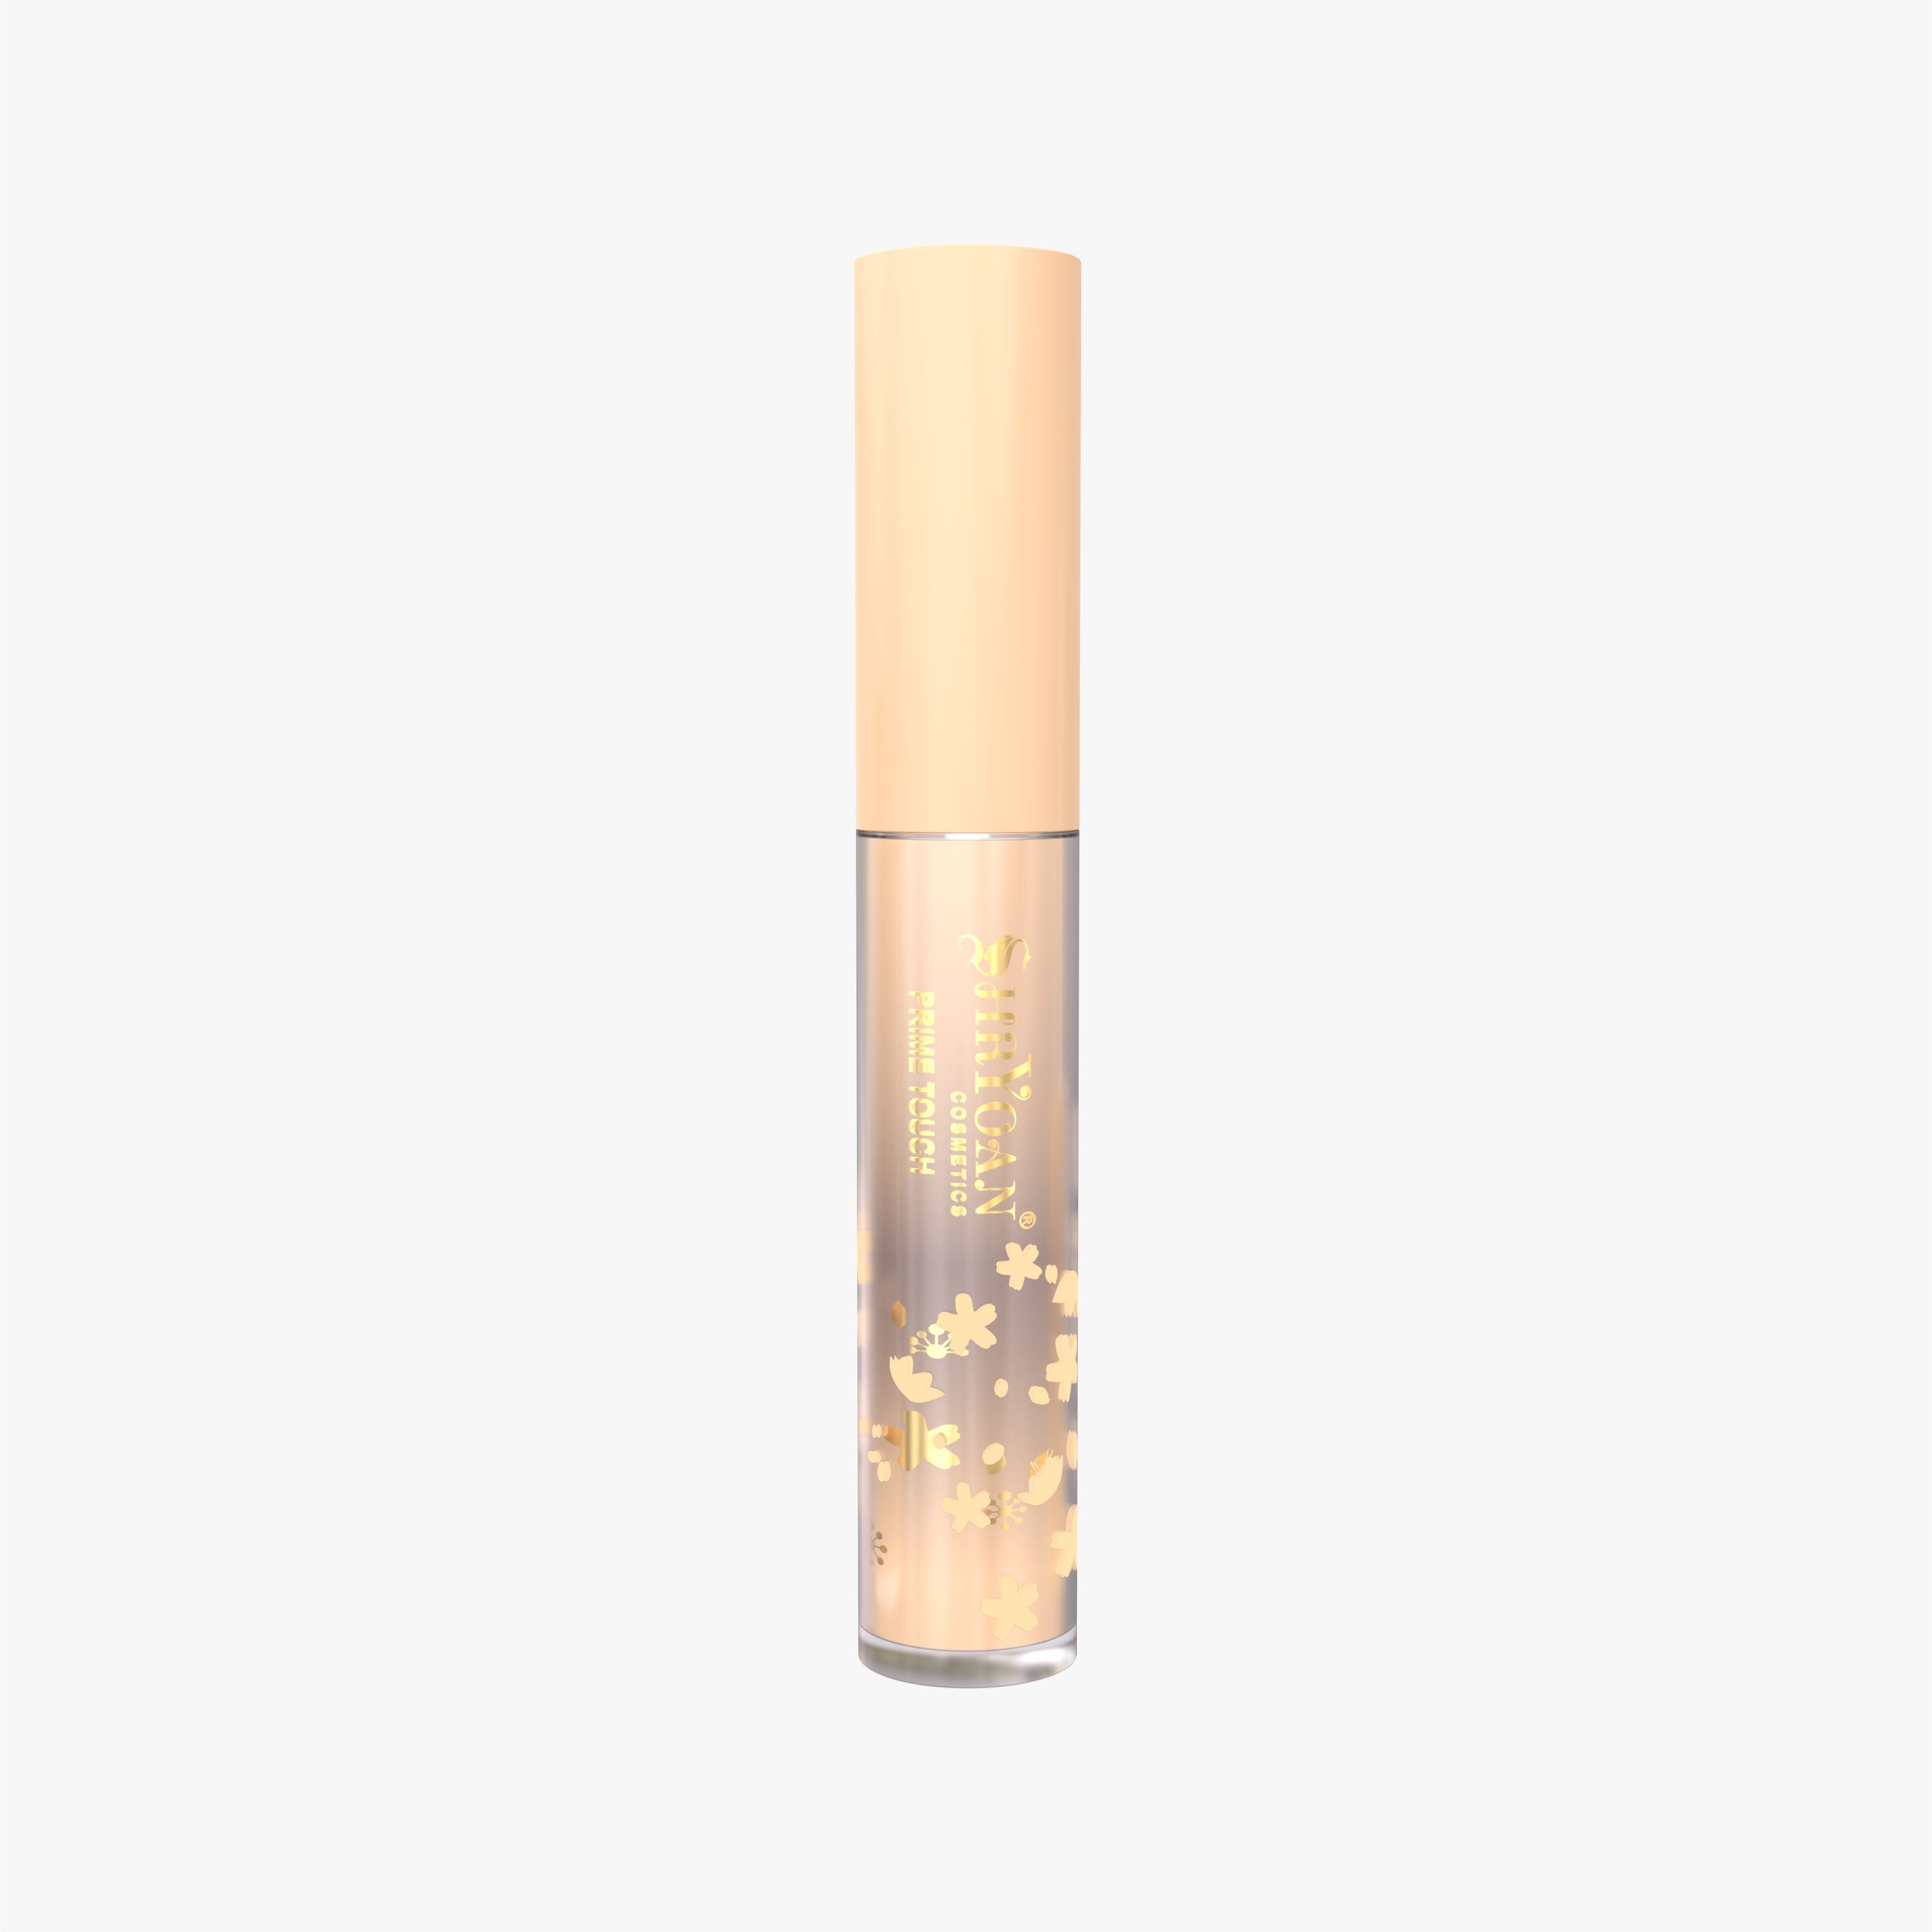 Shryoan Primer Touch Liquid Concealer